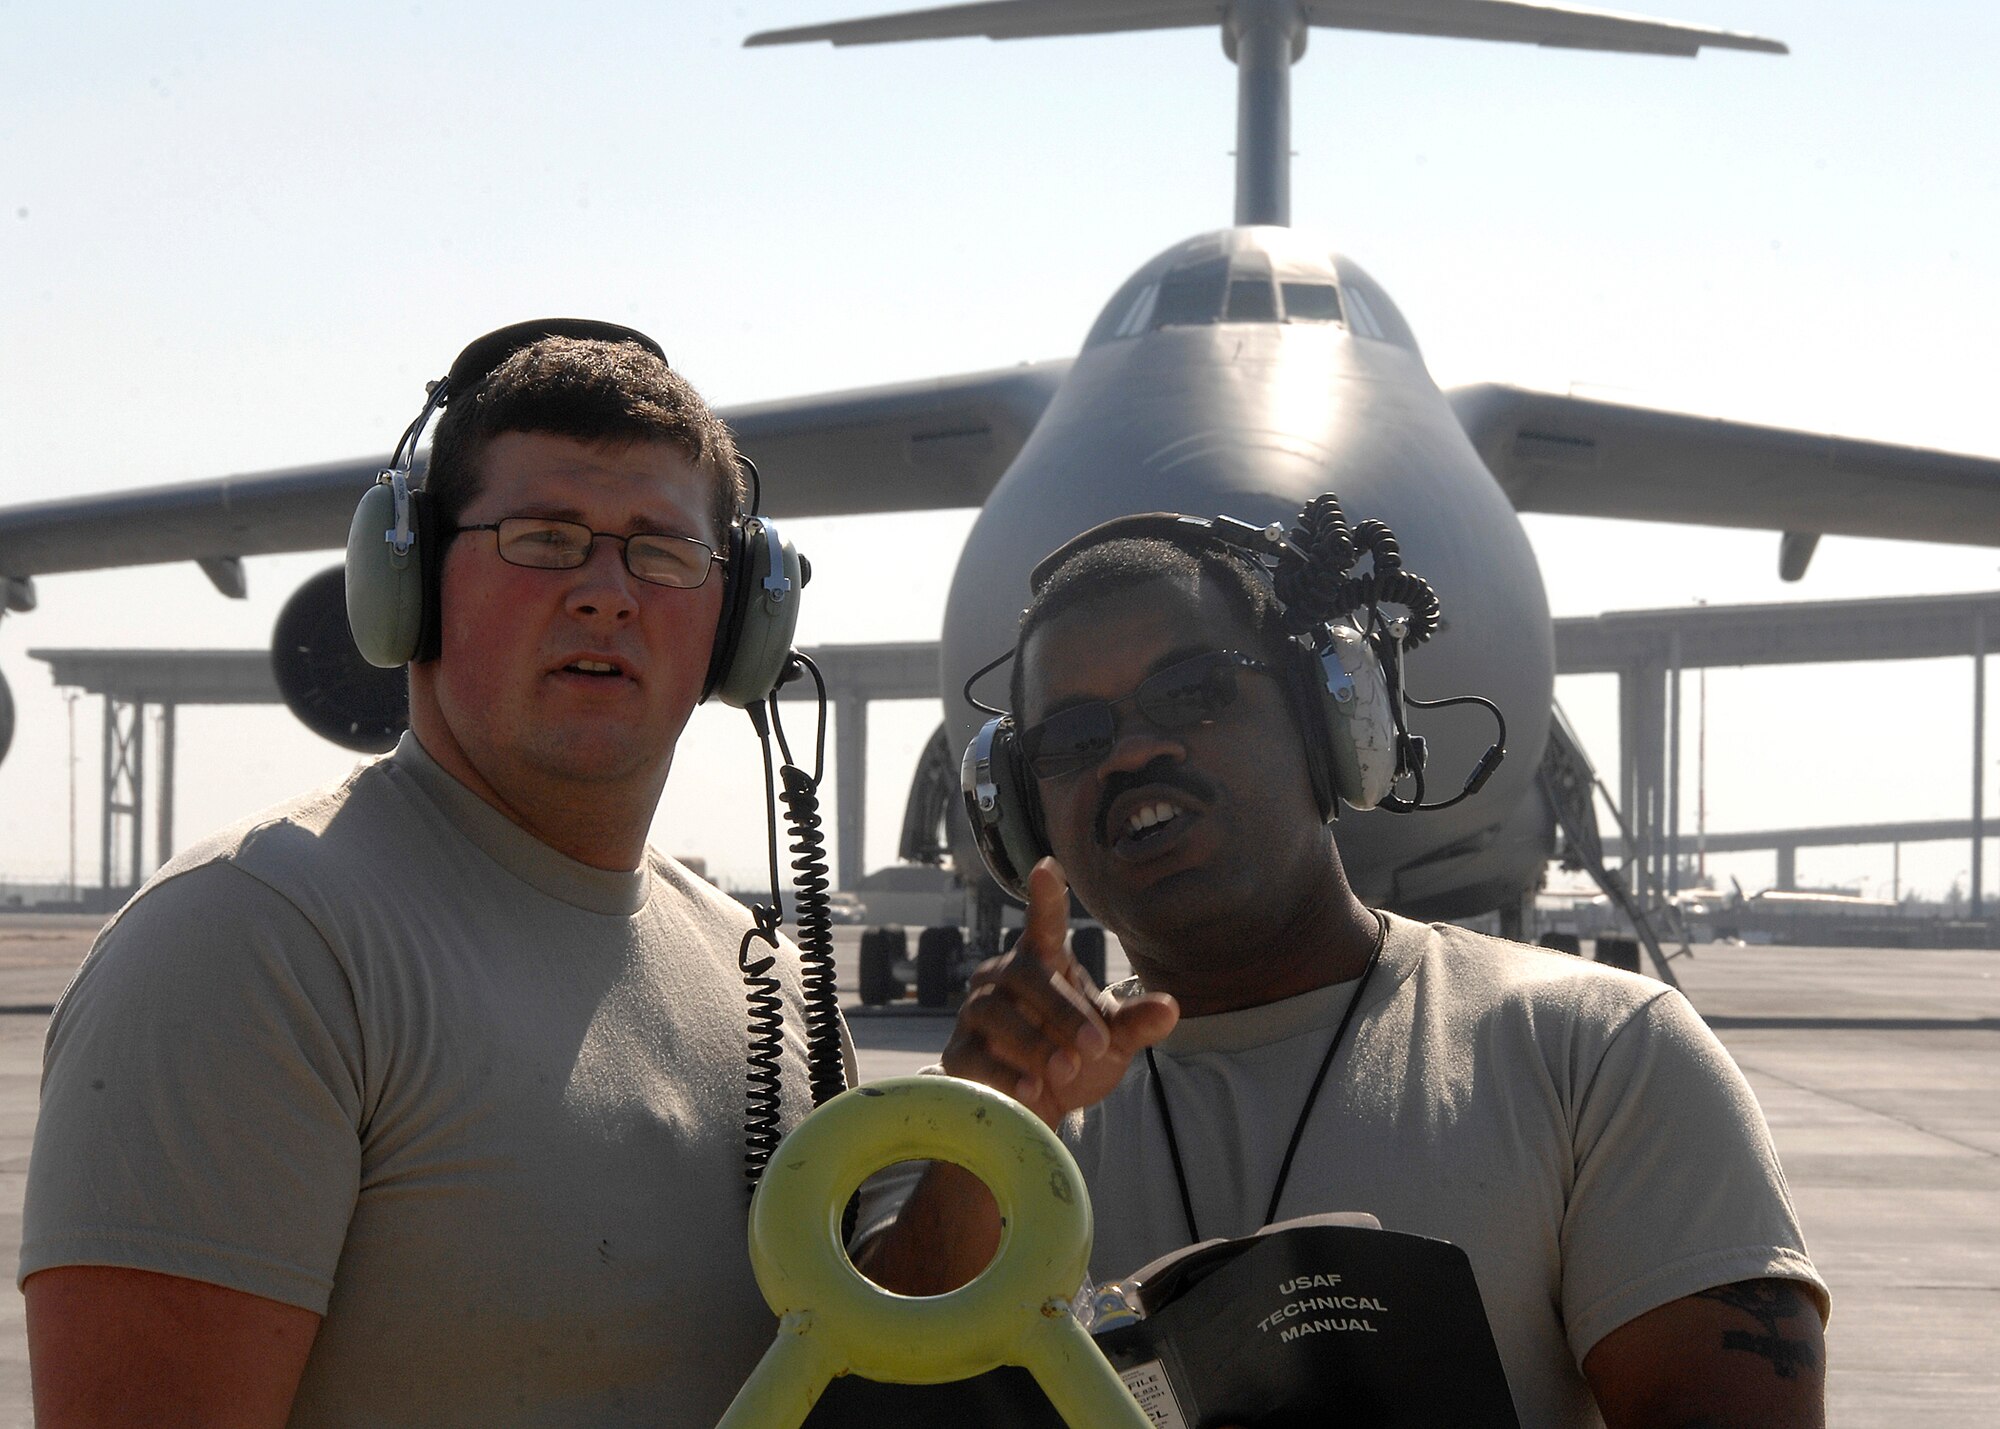 SOUTHWEST ASIA -- Tech. Sgt. Robert Wilson Jr., right, shows Senior Airman Kyle Ward, both 5th Expeditionary Aircraft Maintenance Squadron jet engine mechanics, where they will be conducting their visual inspections of a C-17 Globemaster III on Nov. 25 at an air base in Southwest Asia. The 5th EAMS performs maintenance on C-5 Galaxy and C-17 aircraft deployed in support of Operations Iraqi Freedom and Enduring Freedom. Sergeant Wilson and Airman Ward are both deployed from Dover Air Force Base, Del. (U.S. Air Force photo/Tech. Sgt. Raheem Moore)